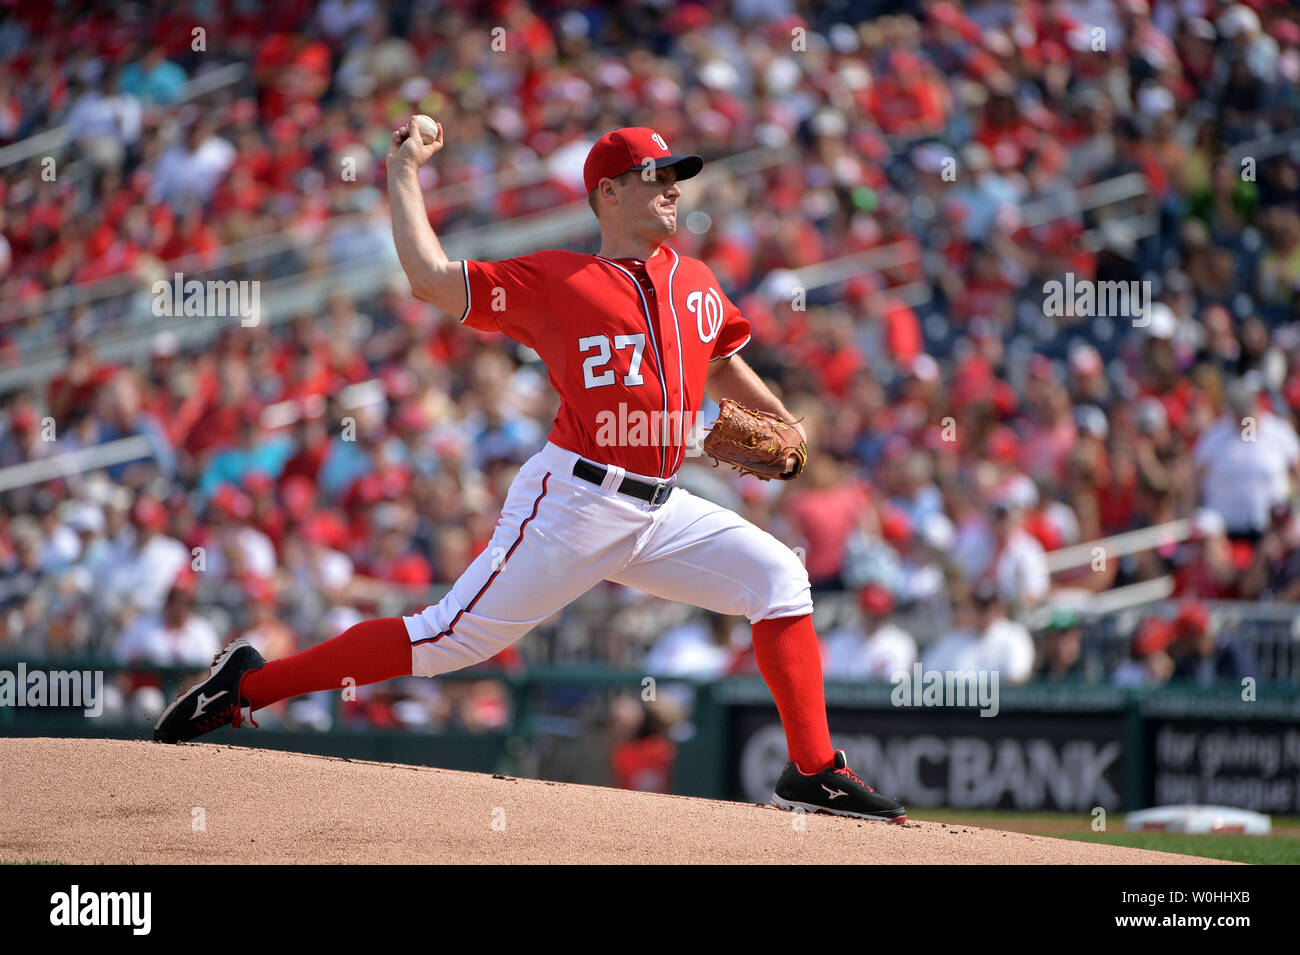 Washington Nationals Jordan Zimmermann pitches against the  Miami Marlins in the second inning at Nationals Park in Washington, D.C. on September 28, 2014. UPI/Kevin Dietsch Stock Photo